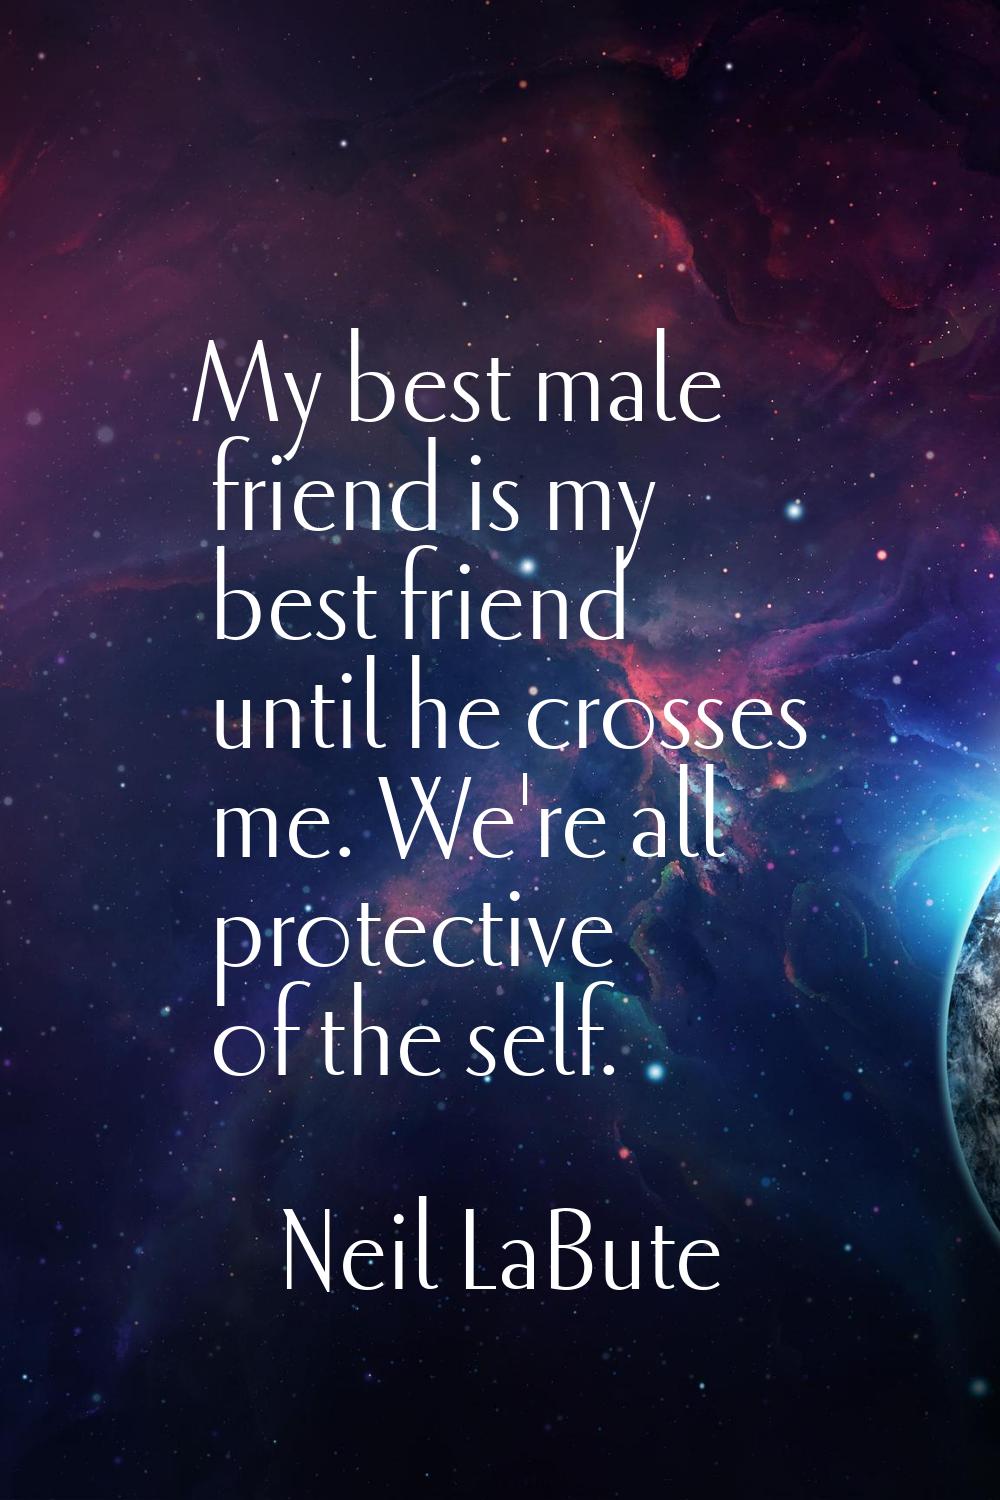 My best male friend is my best friend until he crosses me. We're all protective of the self.